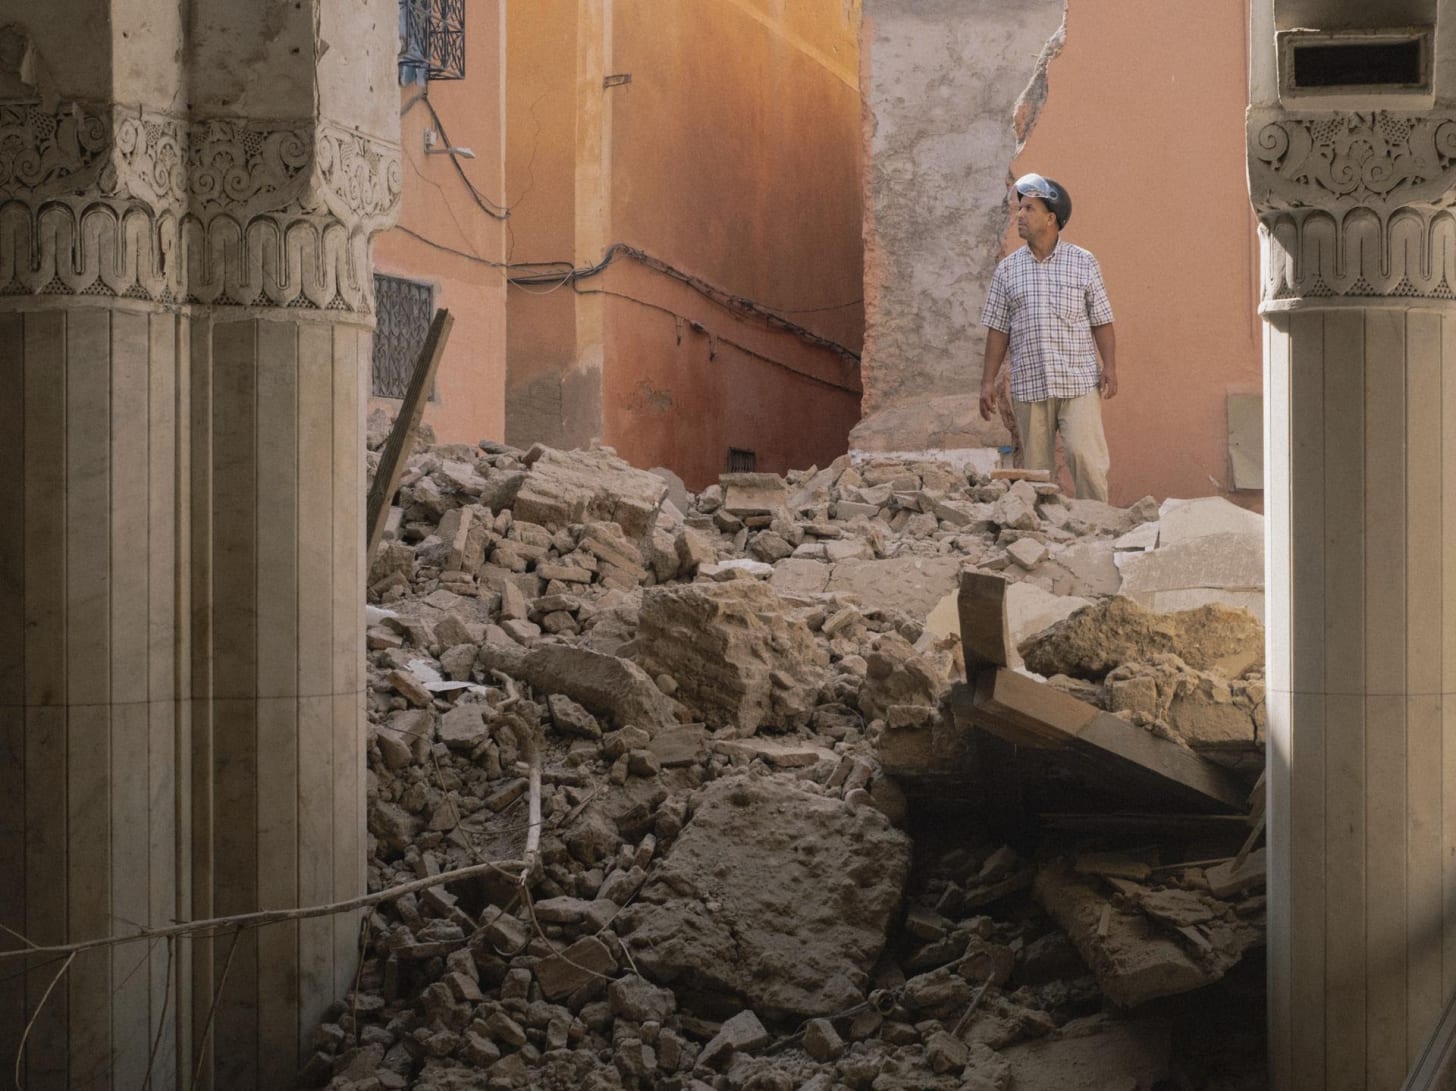 A man inspects the damage caused by the earthquake in the old Medina of Marrakech, Morocco.